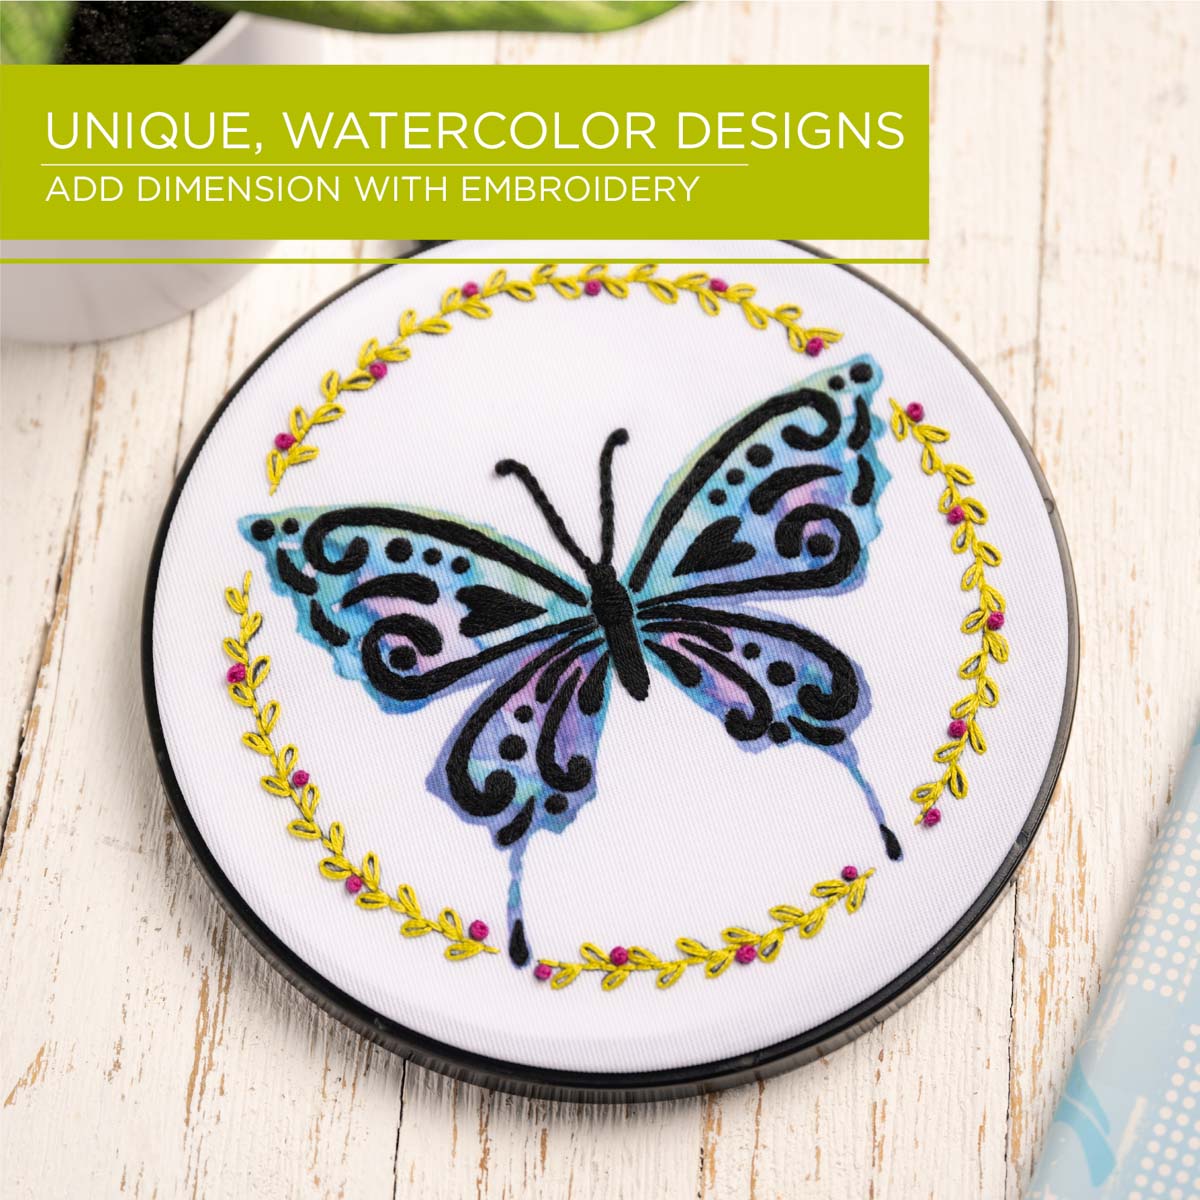 Buy Kaleido Hand Embroidery Patterns Iron On Transfers Online at